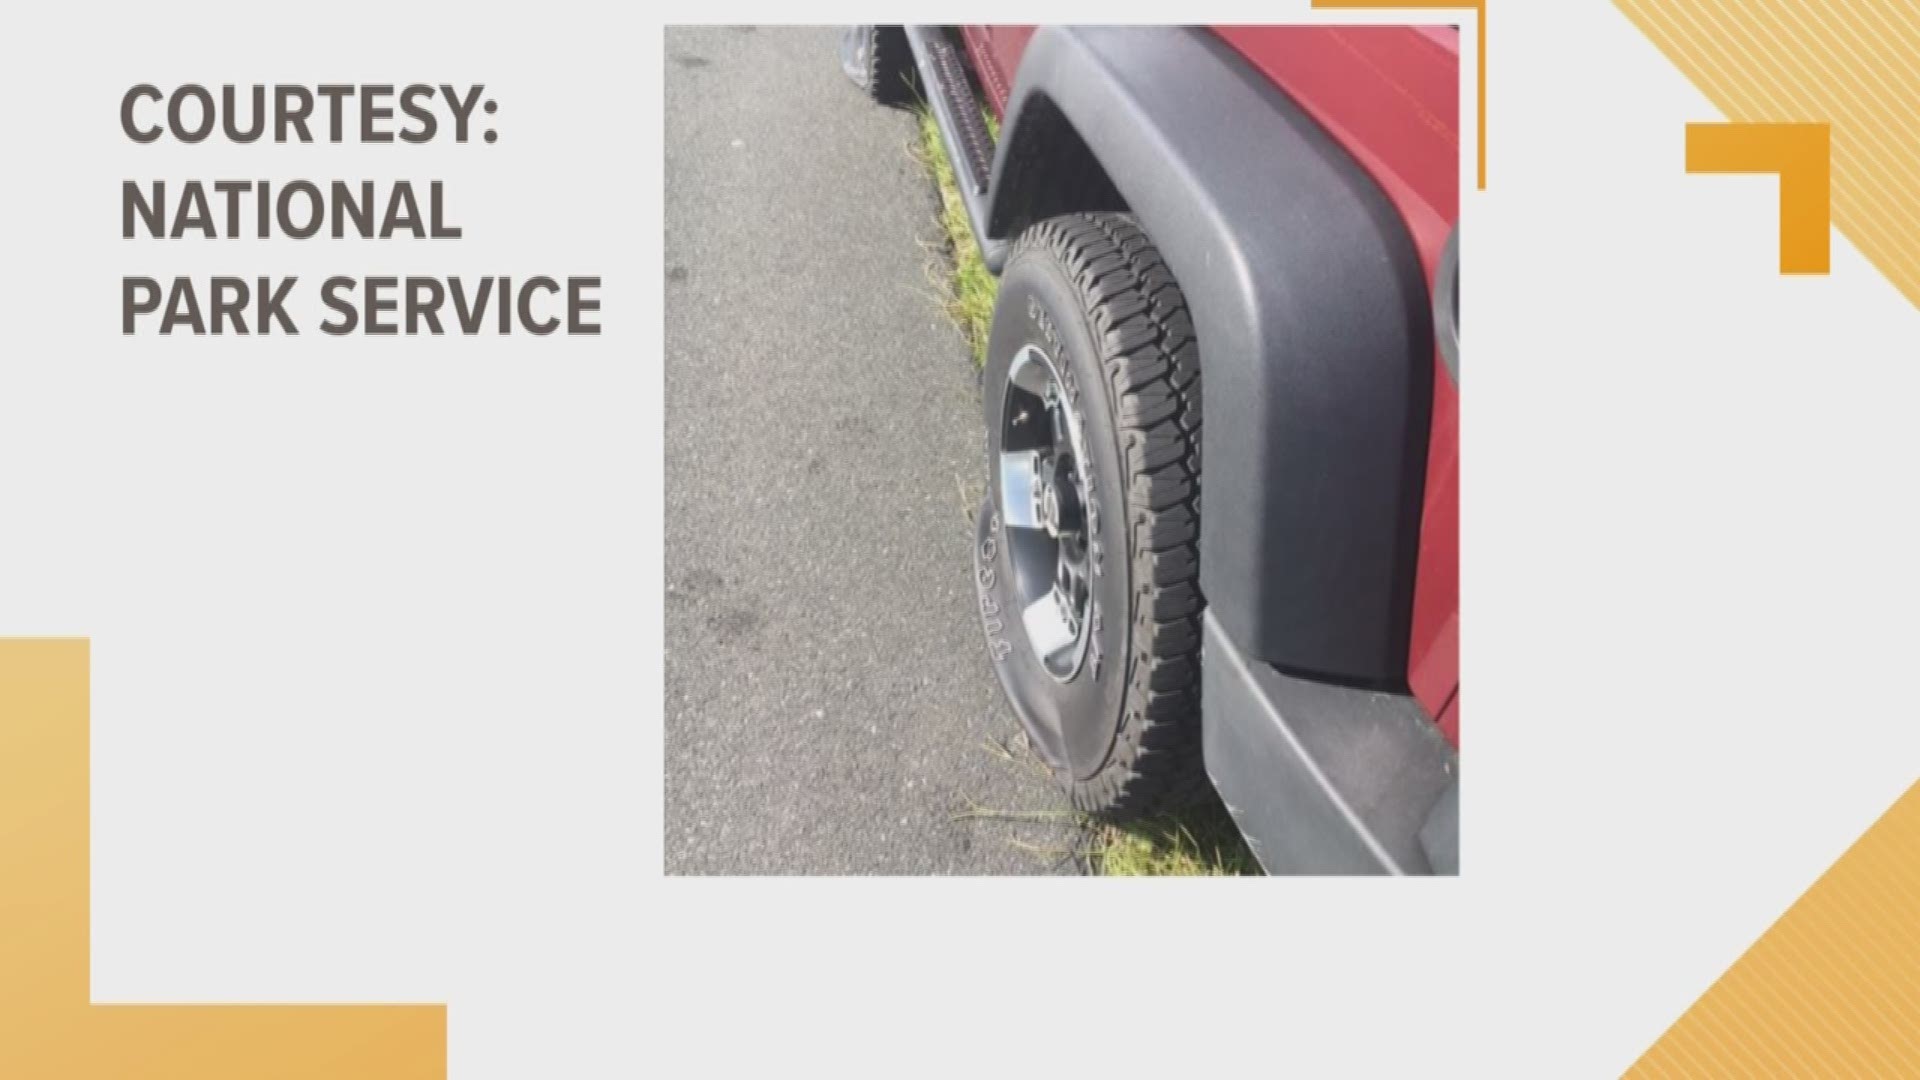 National Park Service Rangers caught the 62-year-old man slashing tires at the national seashore. Tires were slashed on at least 66 vehicles, most of them sport utility vehicles, since the beginning of 2019.